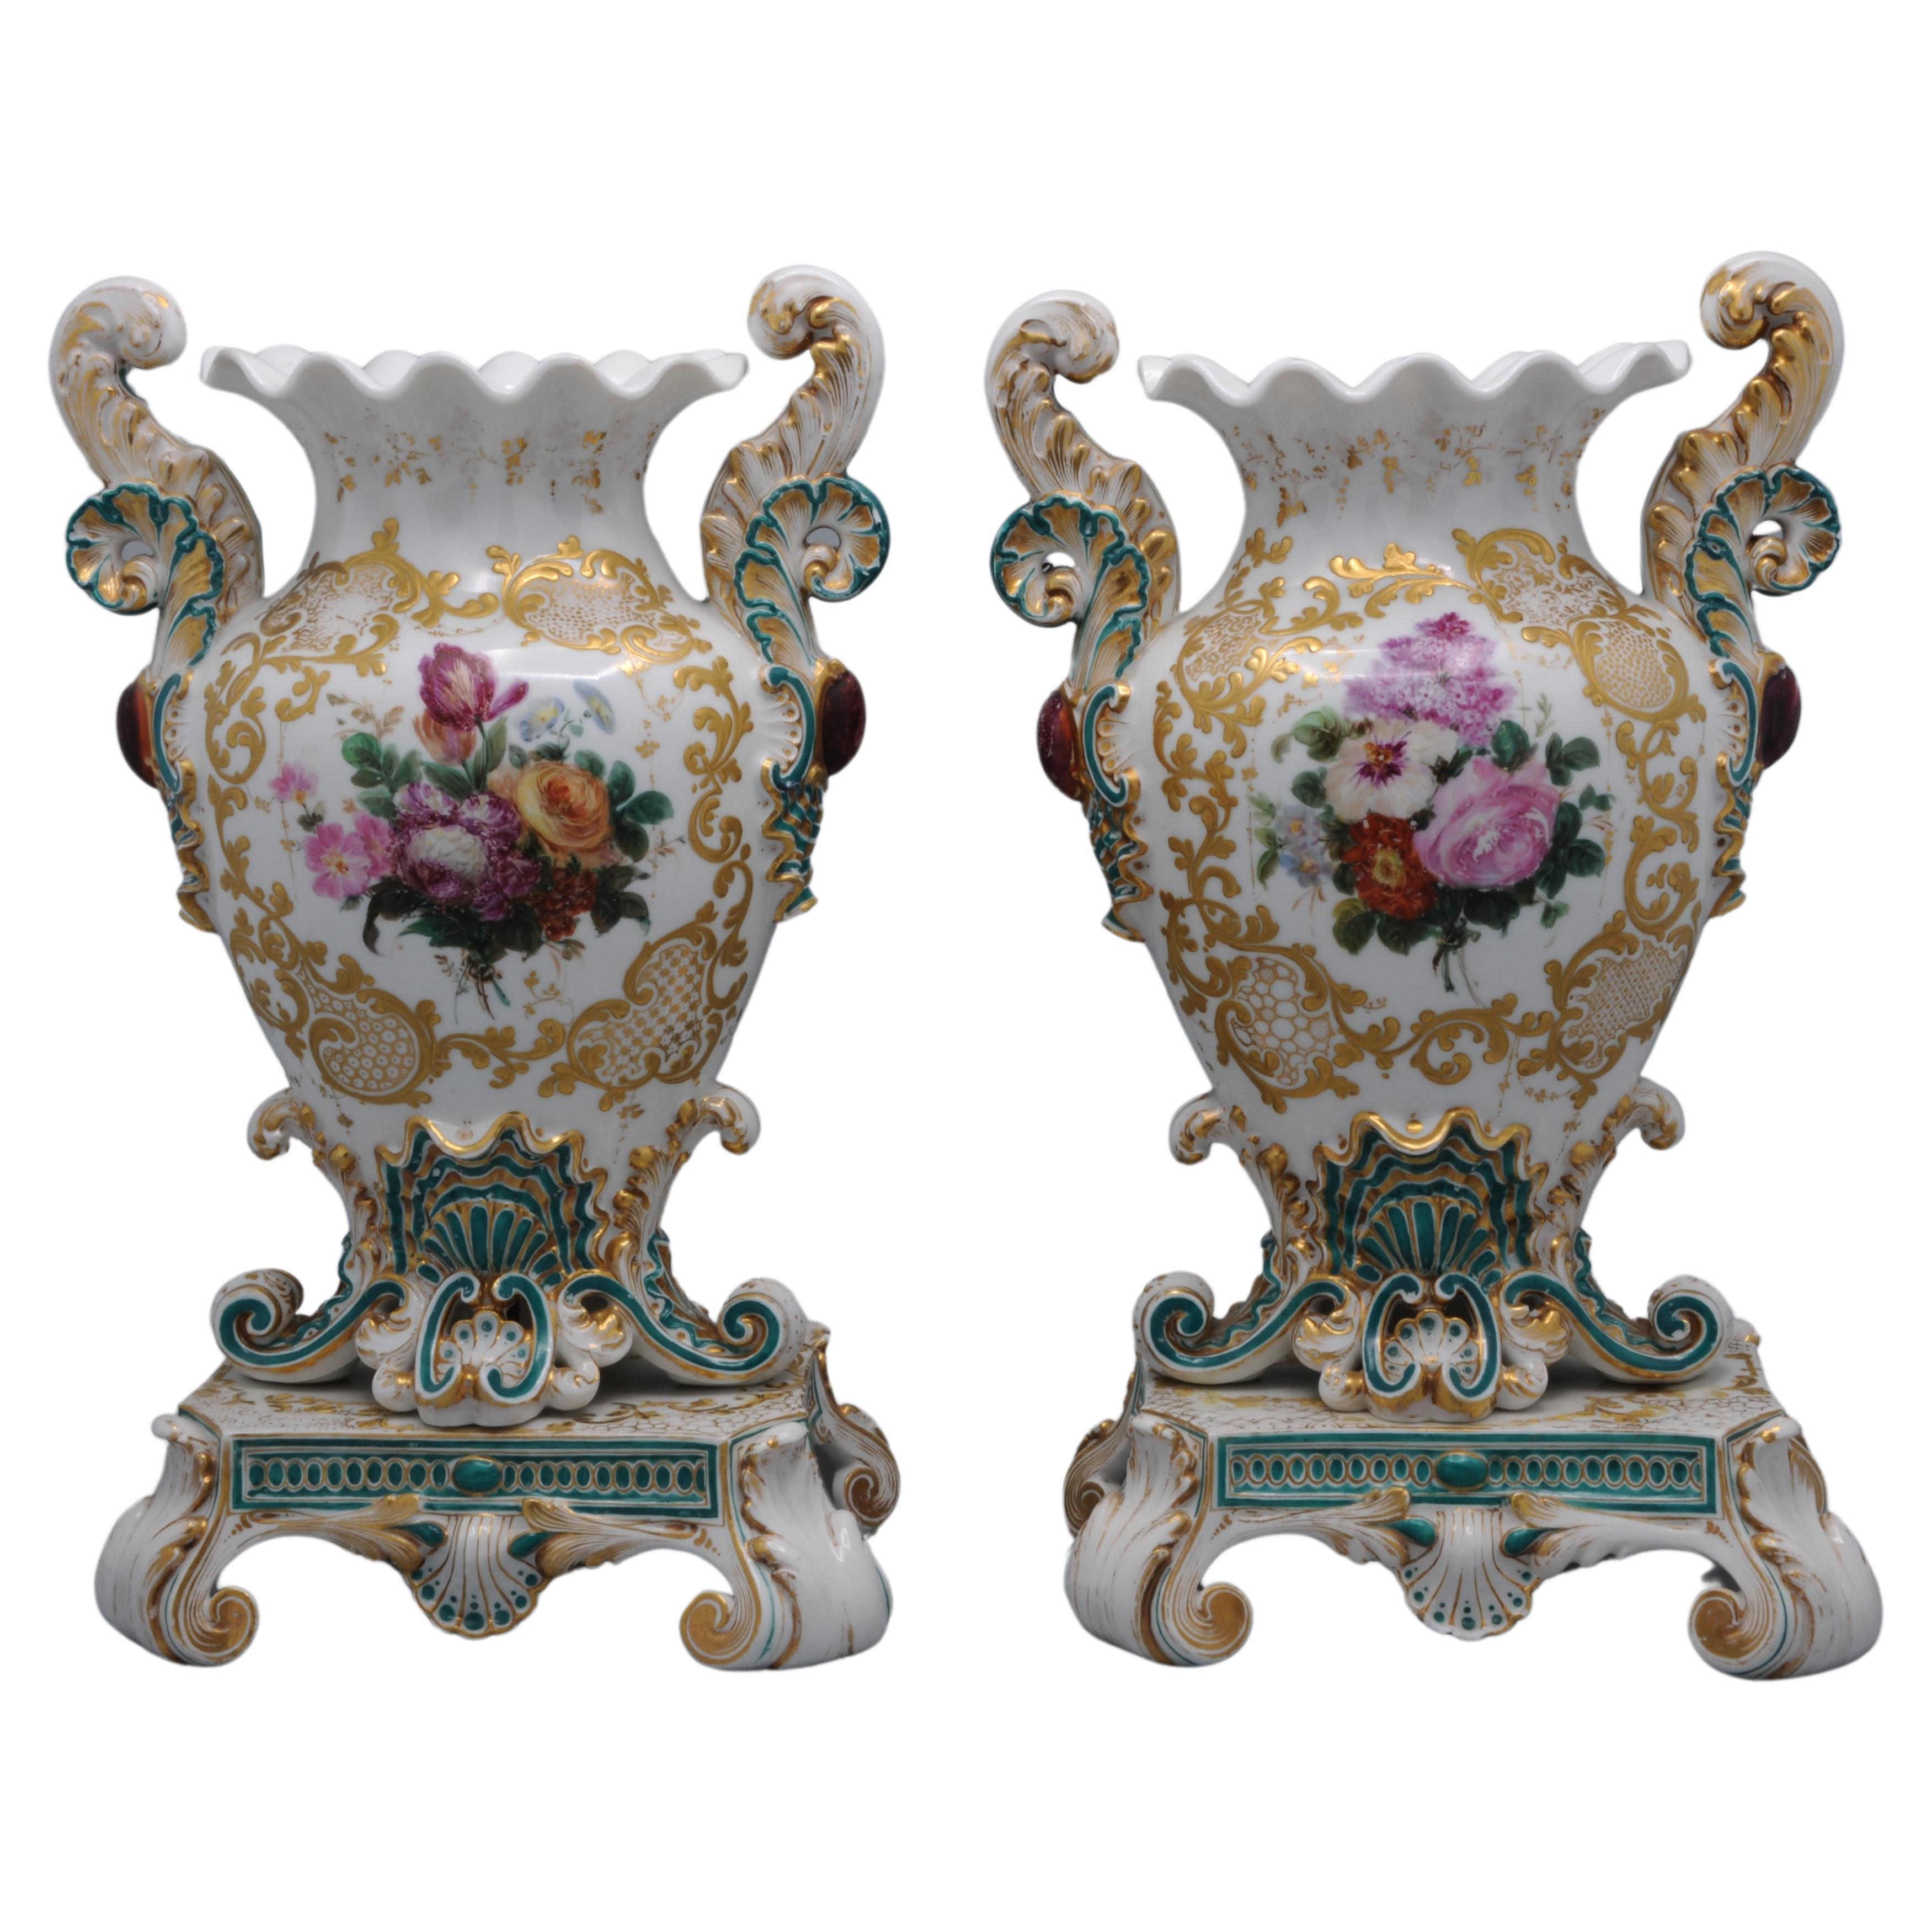 Jacob Petit (1796-1868) - Pair of Rococo Revival Vases For Sale